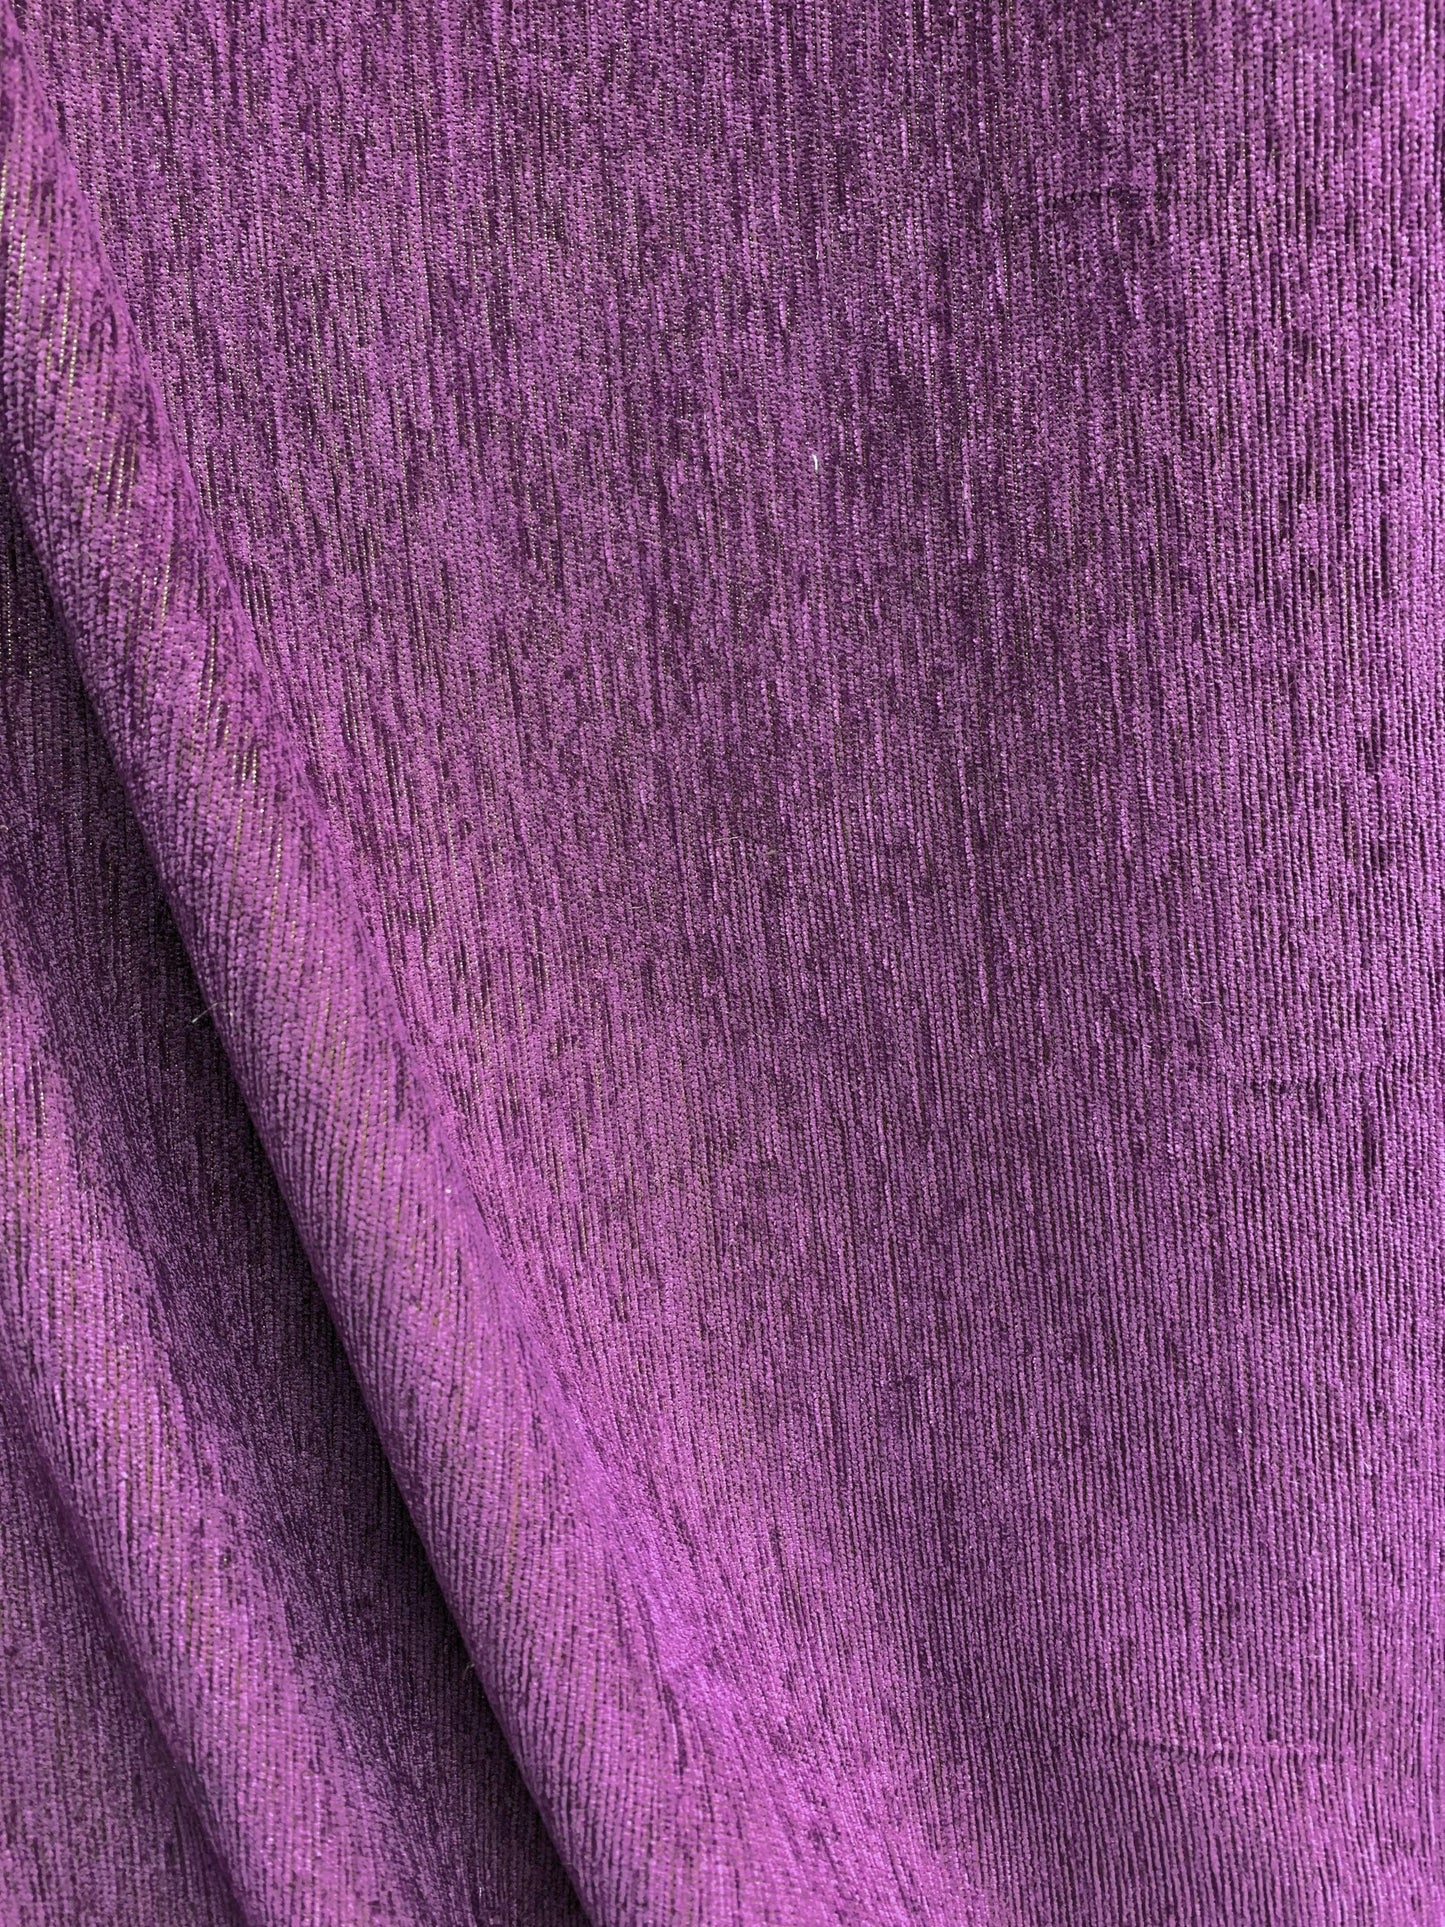 PURPLE Solid Chenille Velvet Upholstery Drapery Fabric (58 in.) Sold By The Yard